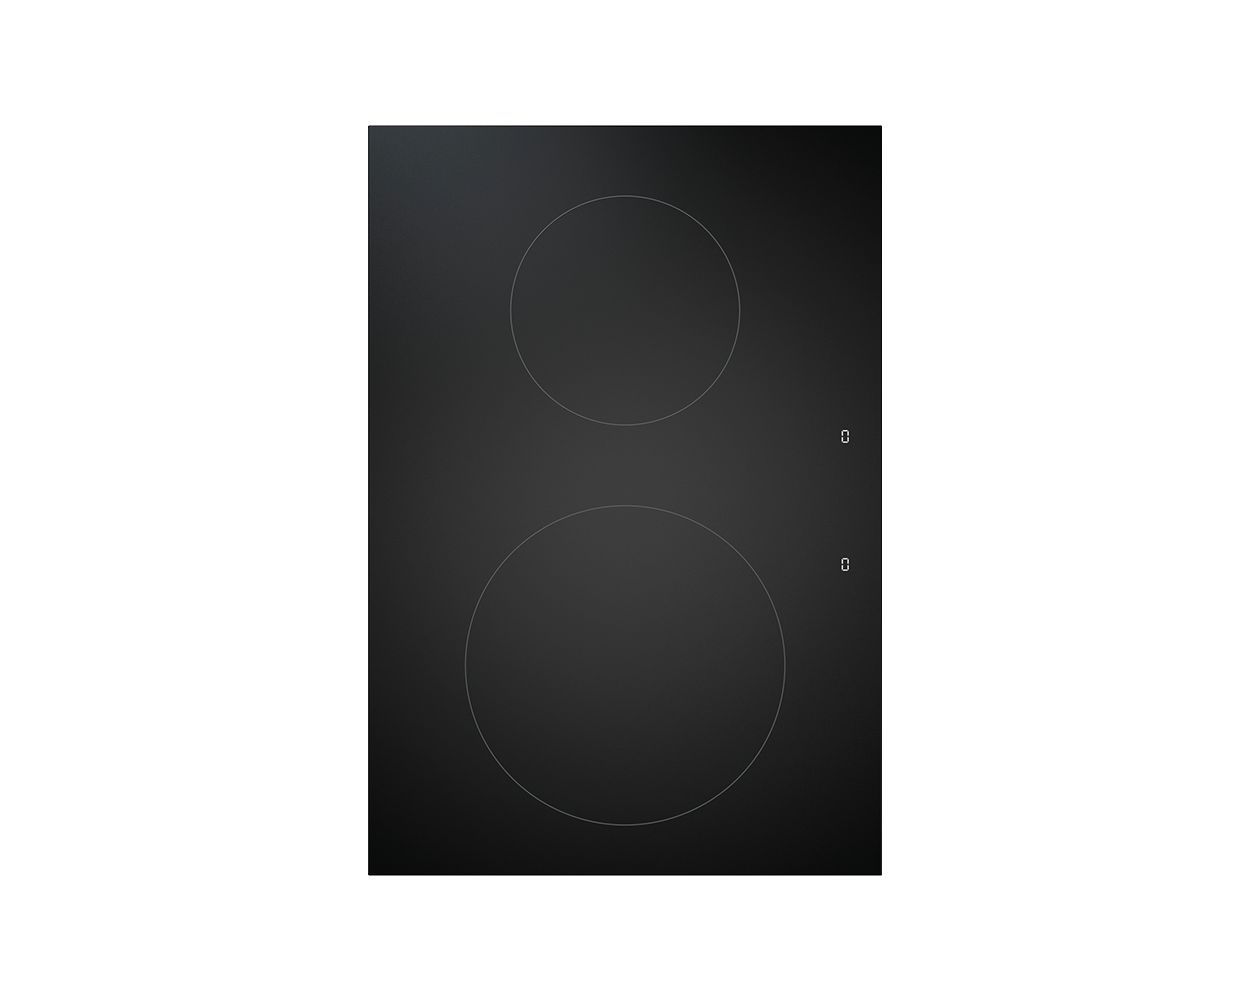 Bora professional 3.0 modular zone induction cooktop. Sold by Krieder UK